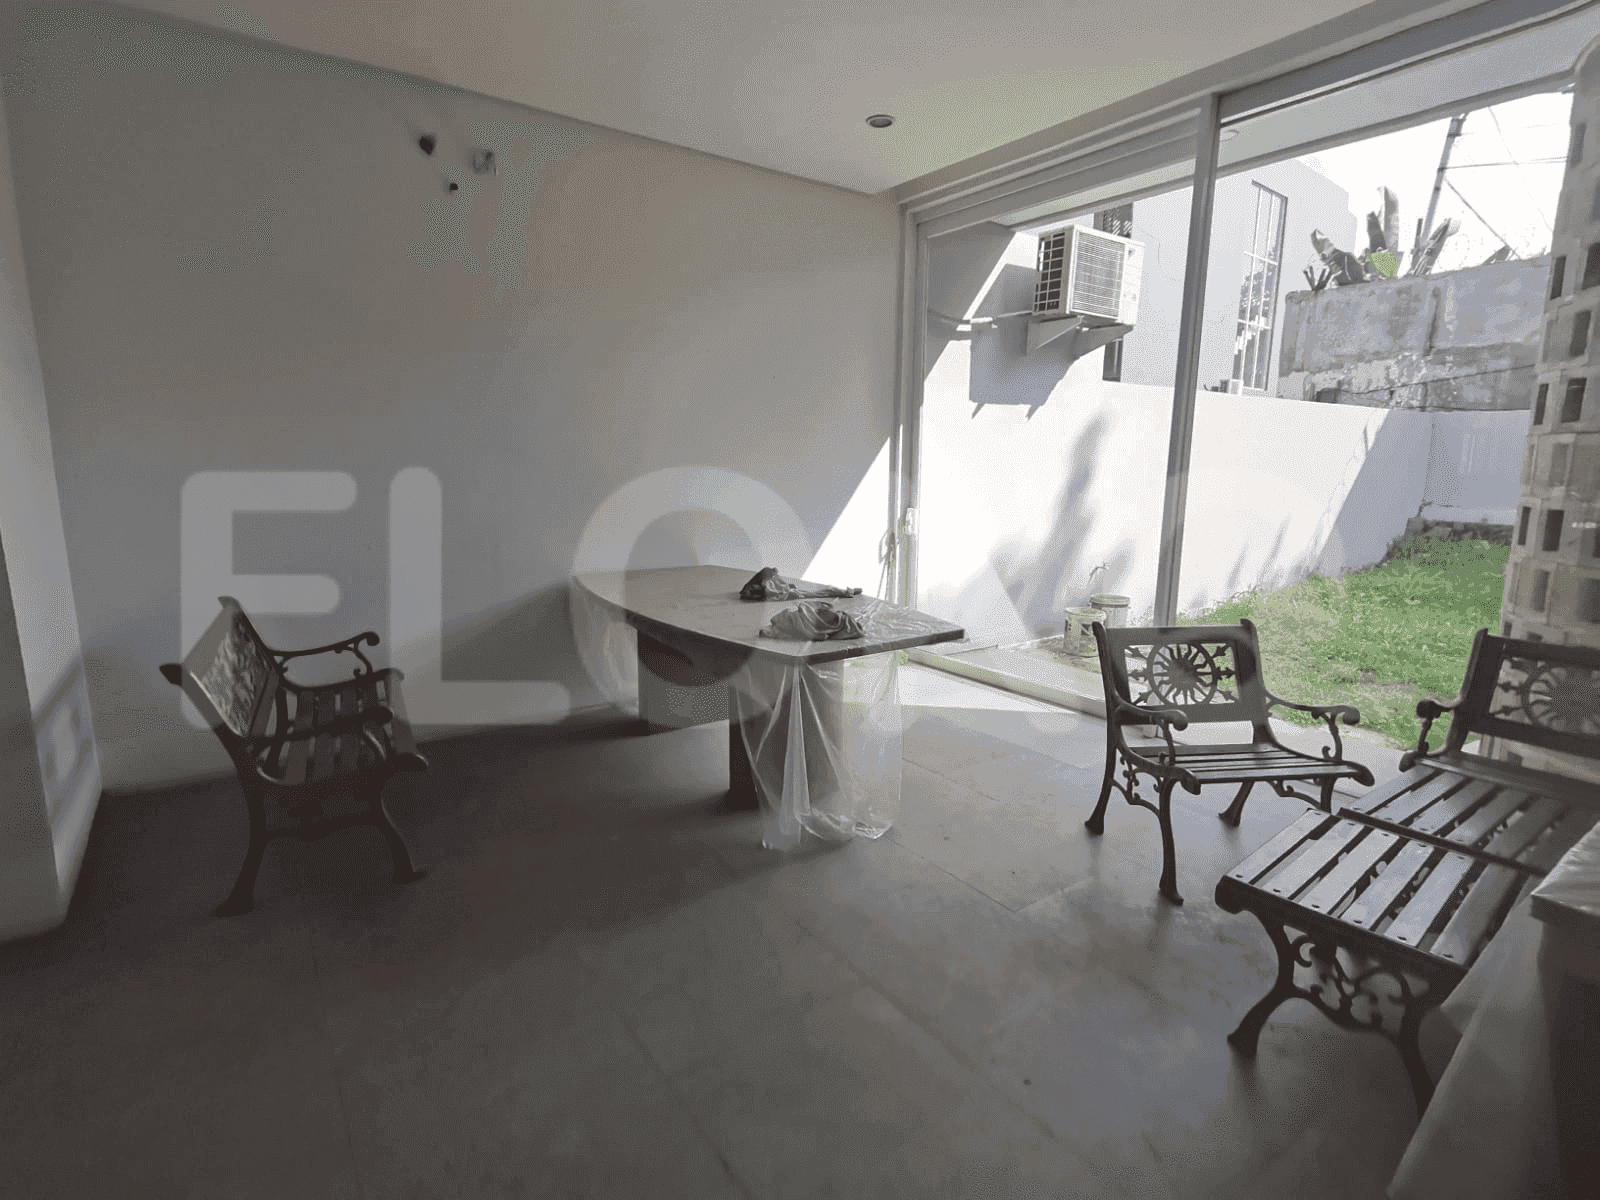 350 sqm, 3 BR house for rent in Pasar Minggu 6